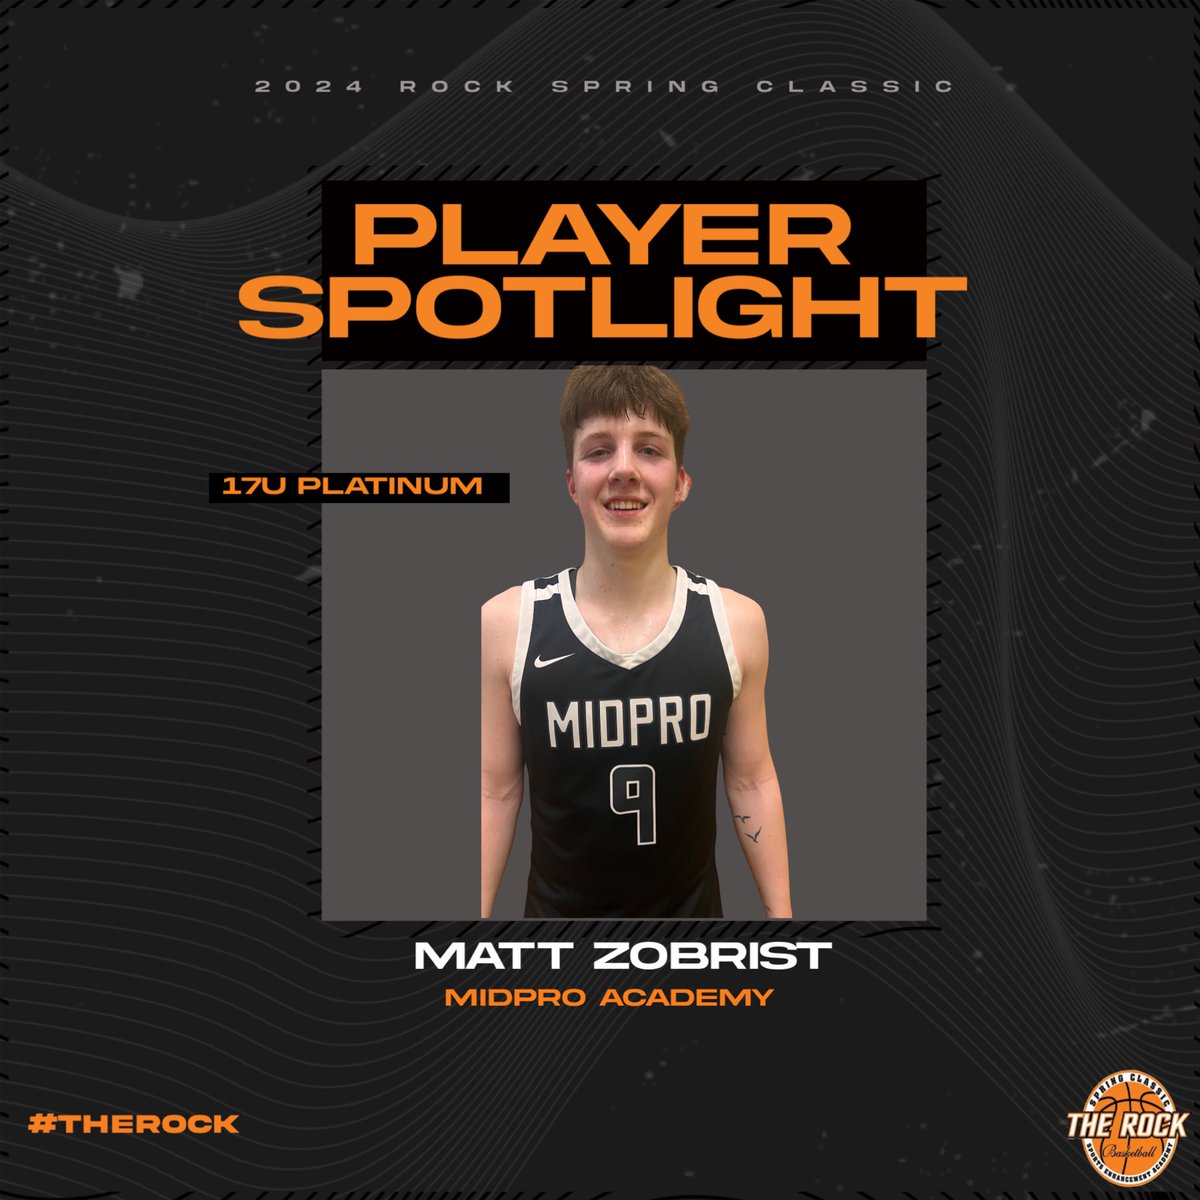 🚨PLAYER SPOTLIGHT🚨 2025 Matt Zobrist led @MidProAcademy with 19pts in their well balanced win over JAG Select. #TheROCK